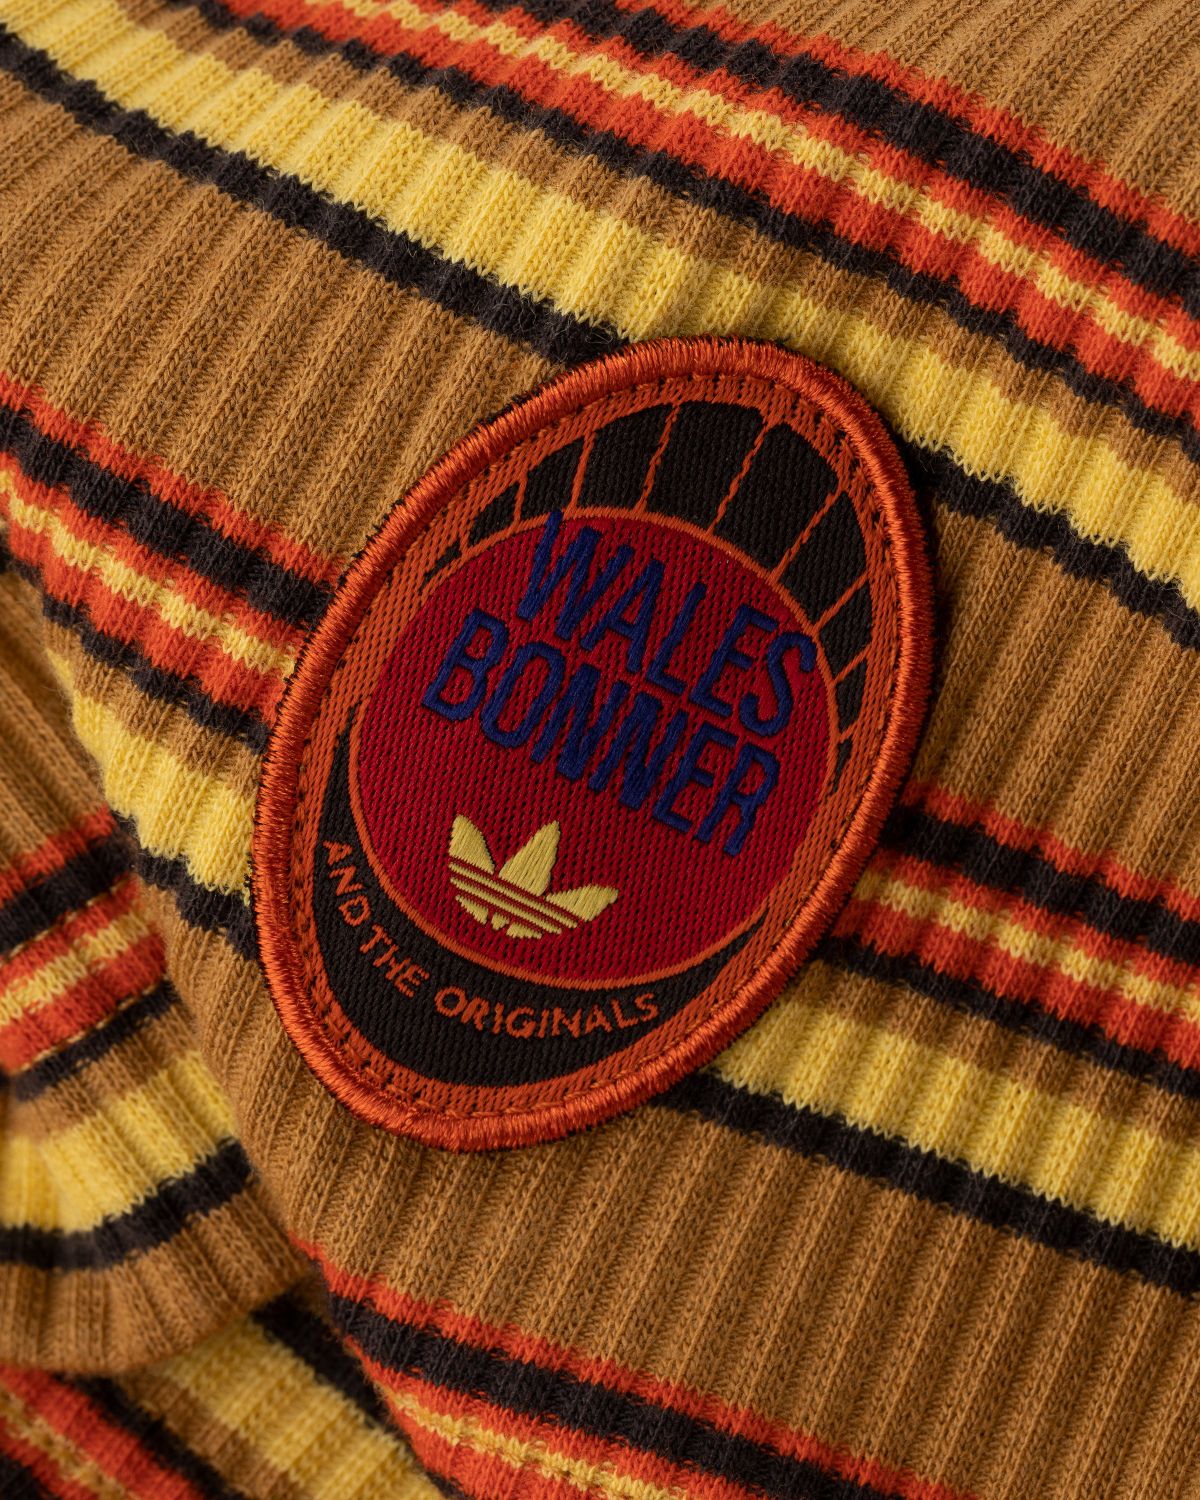 Adidas x Wales Bonner – WB Striped Longsleeve St Fade Gold/Scarlet - Longsleeves - Red - Image 3